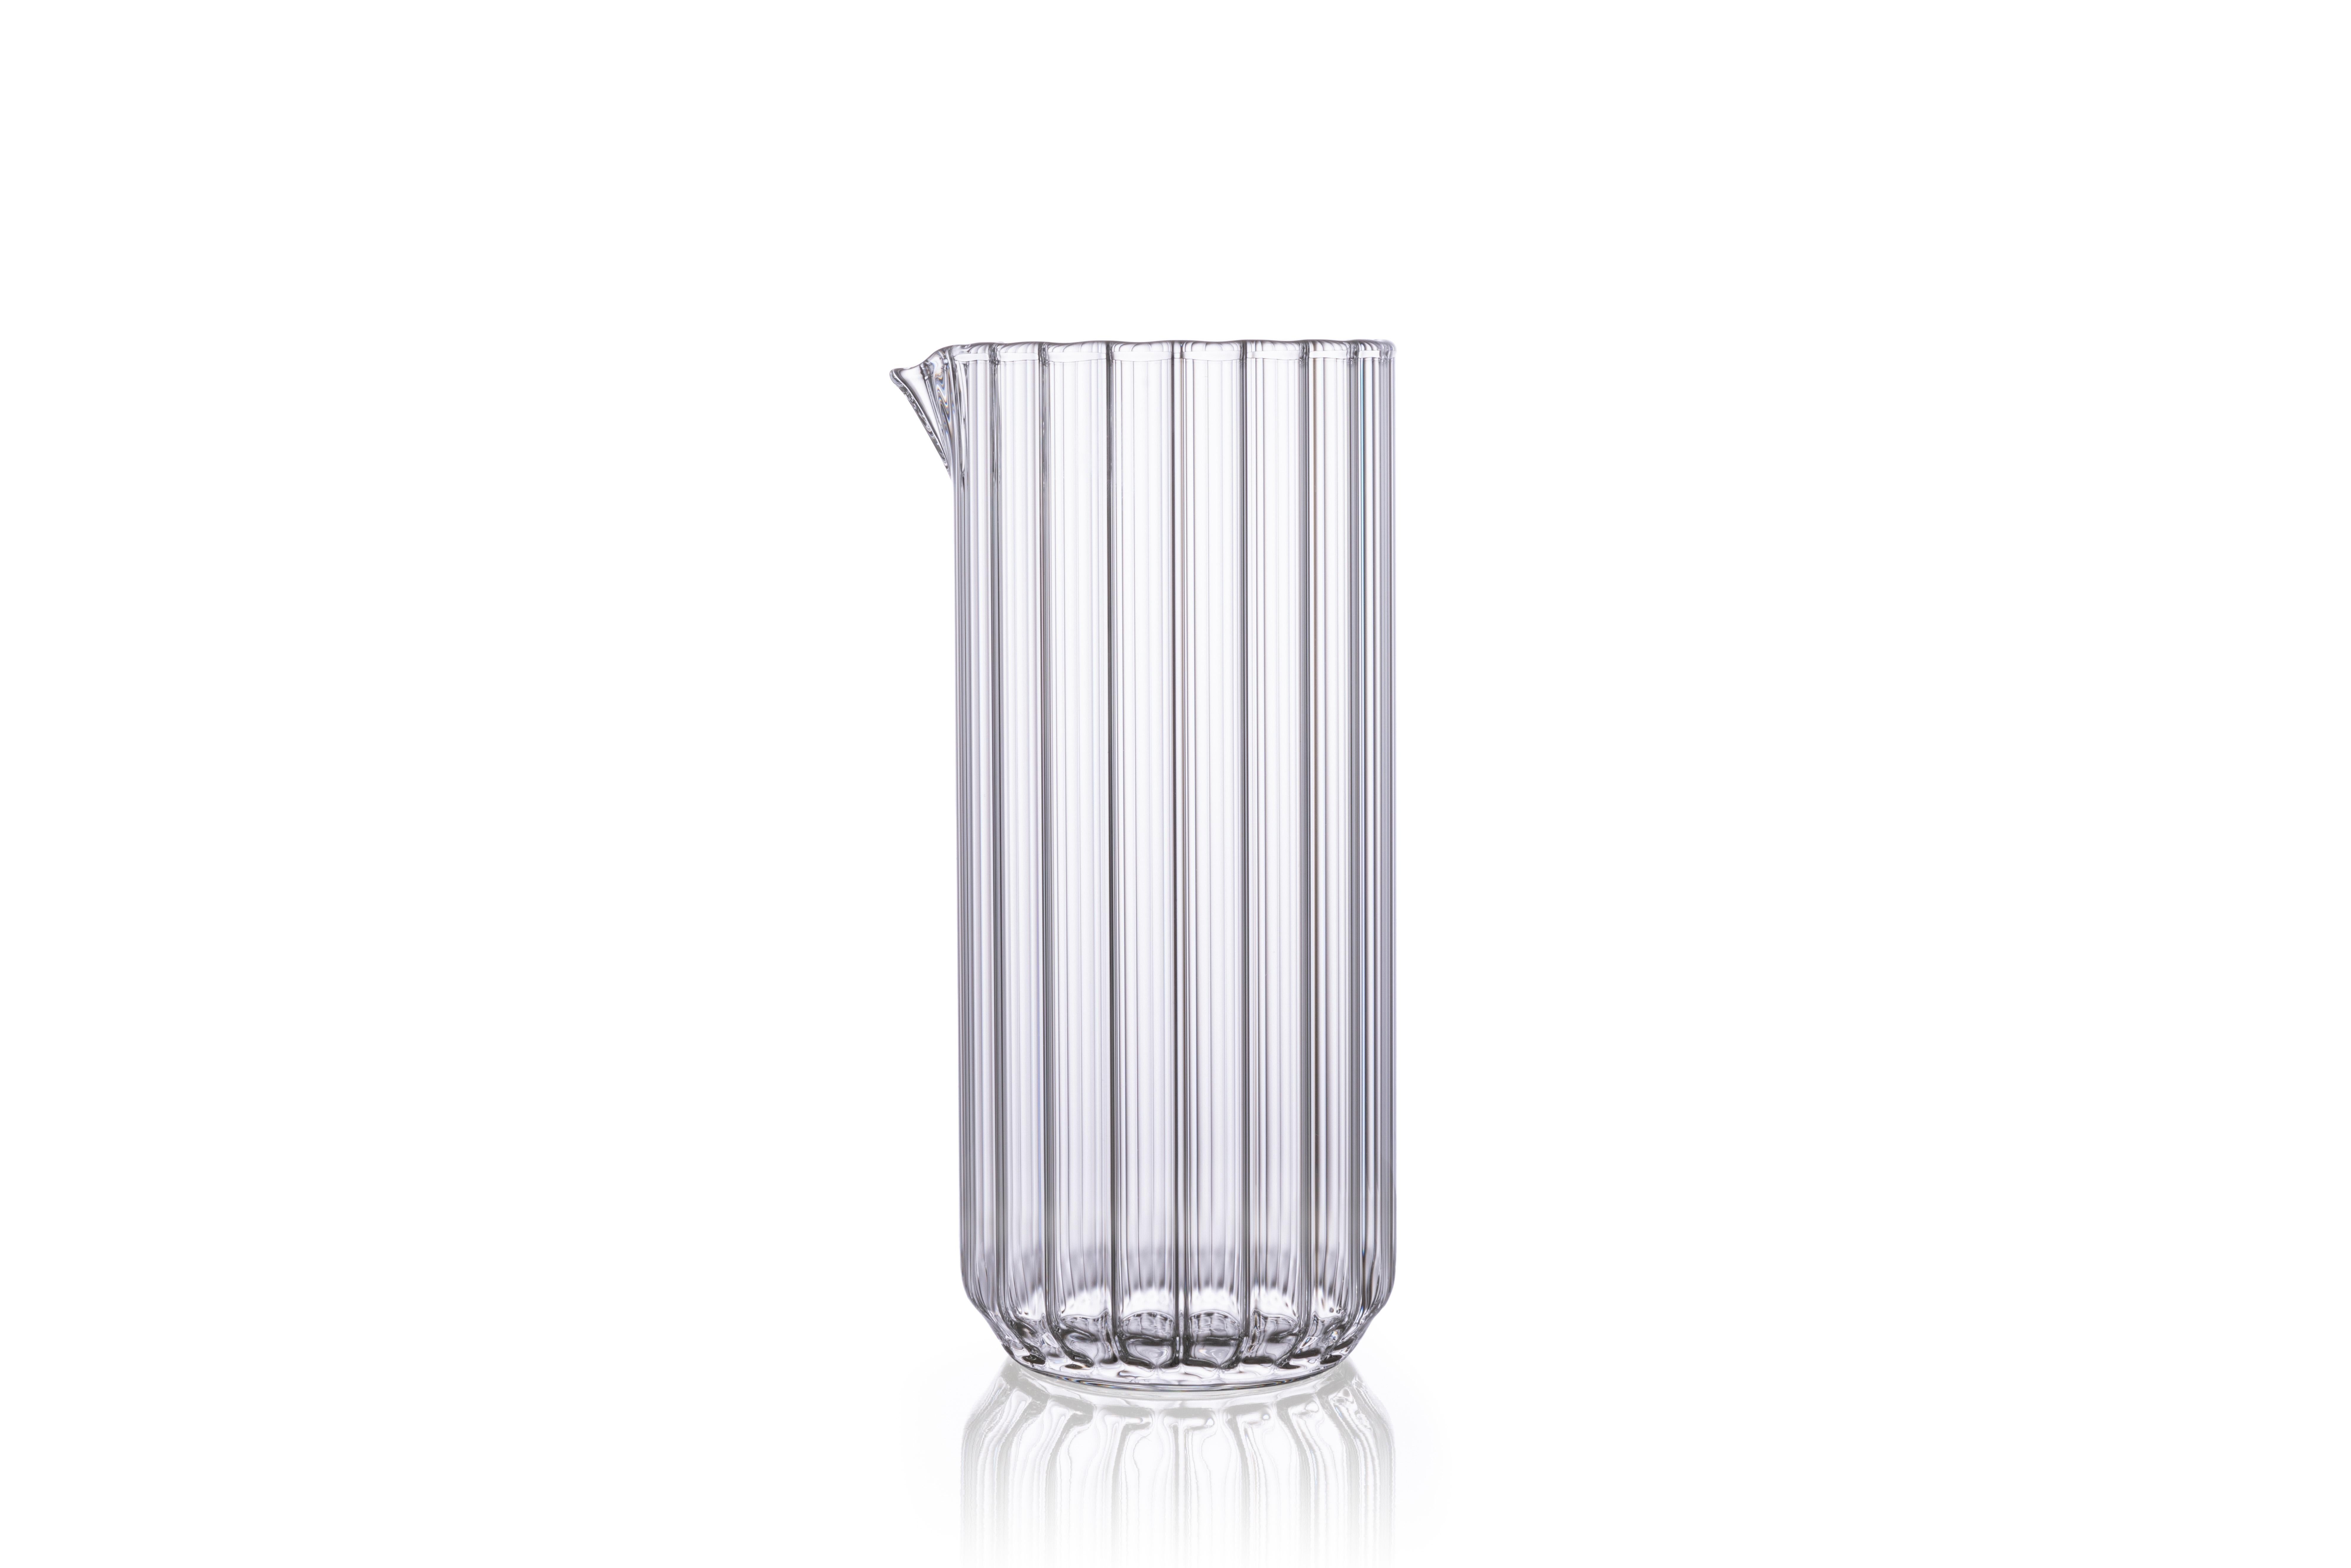 The Dearborn large carafe and four dearborn water glasses.

Perfect for everyday or formal dining settings or cocktails, the minimal and contemporary Dearborn Collection will enrich any occasion. It inverts tradition with a modern touch by having